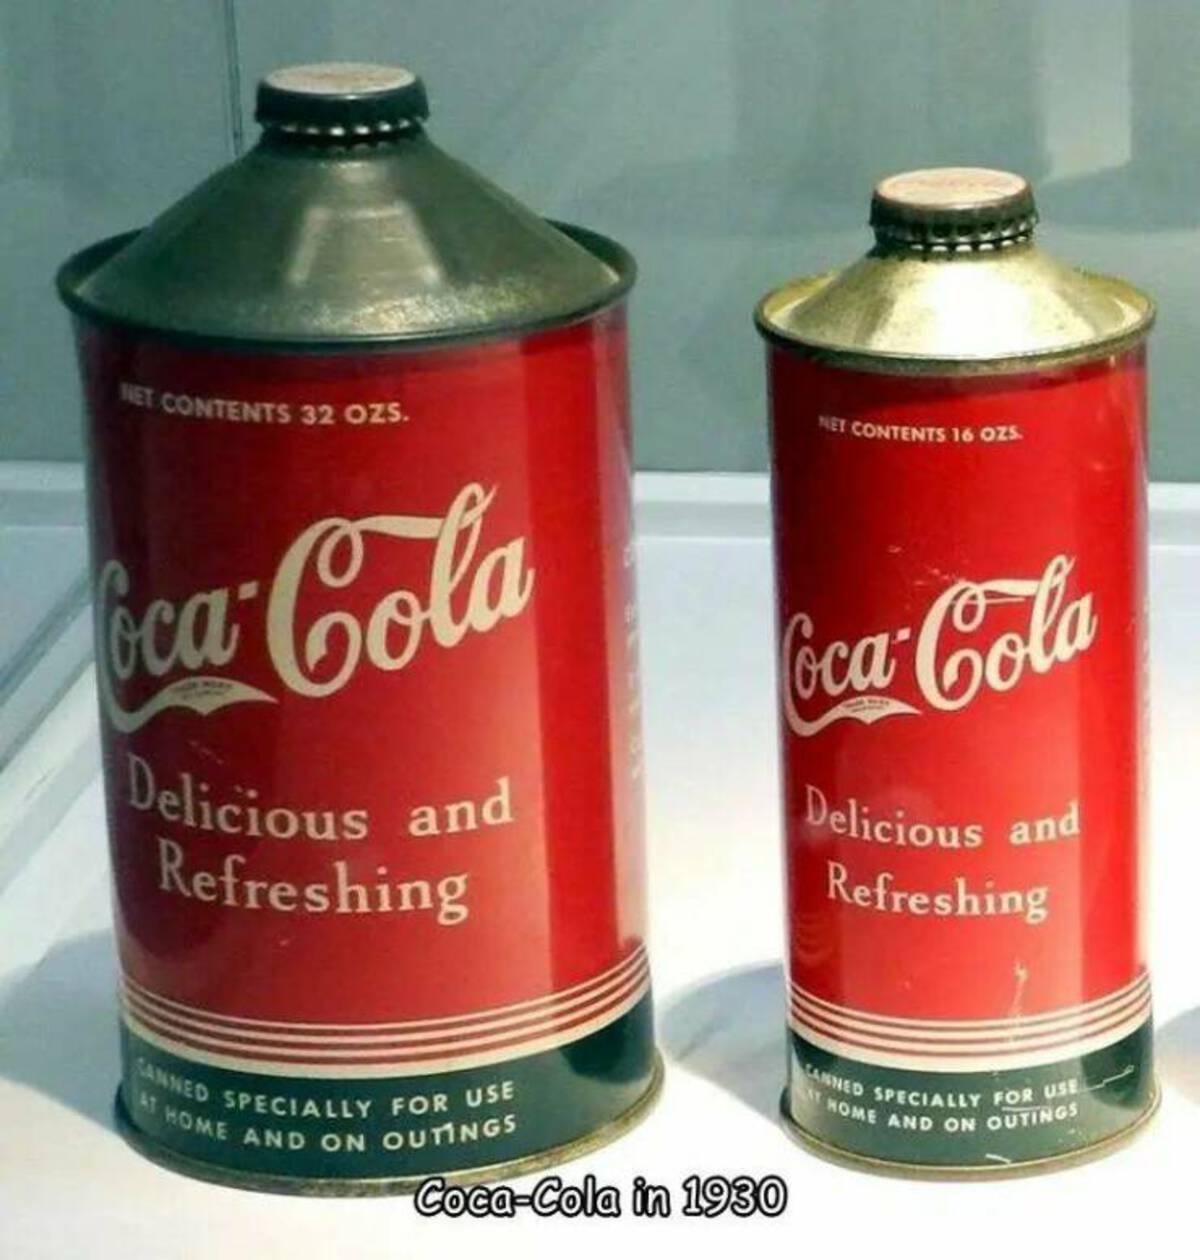 coca cola can 1930 - Net Contents 32 Ozs. CocaCola Delicious and Refreshing Net Contents 16 Ozs. CocaCola Delicious and Refreshing Sanned At Home And On Outings Specially For Use CocaCola in 1930 Canned Specially For Use Home And On Outings